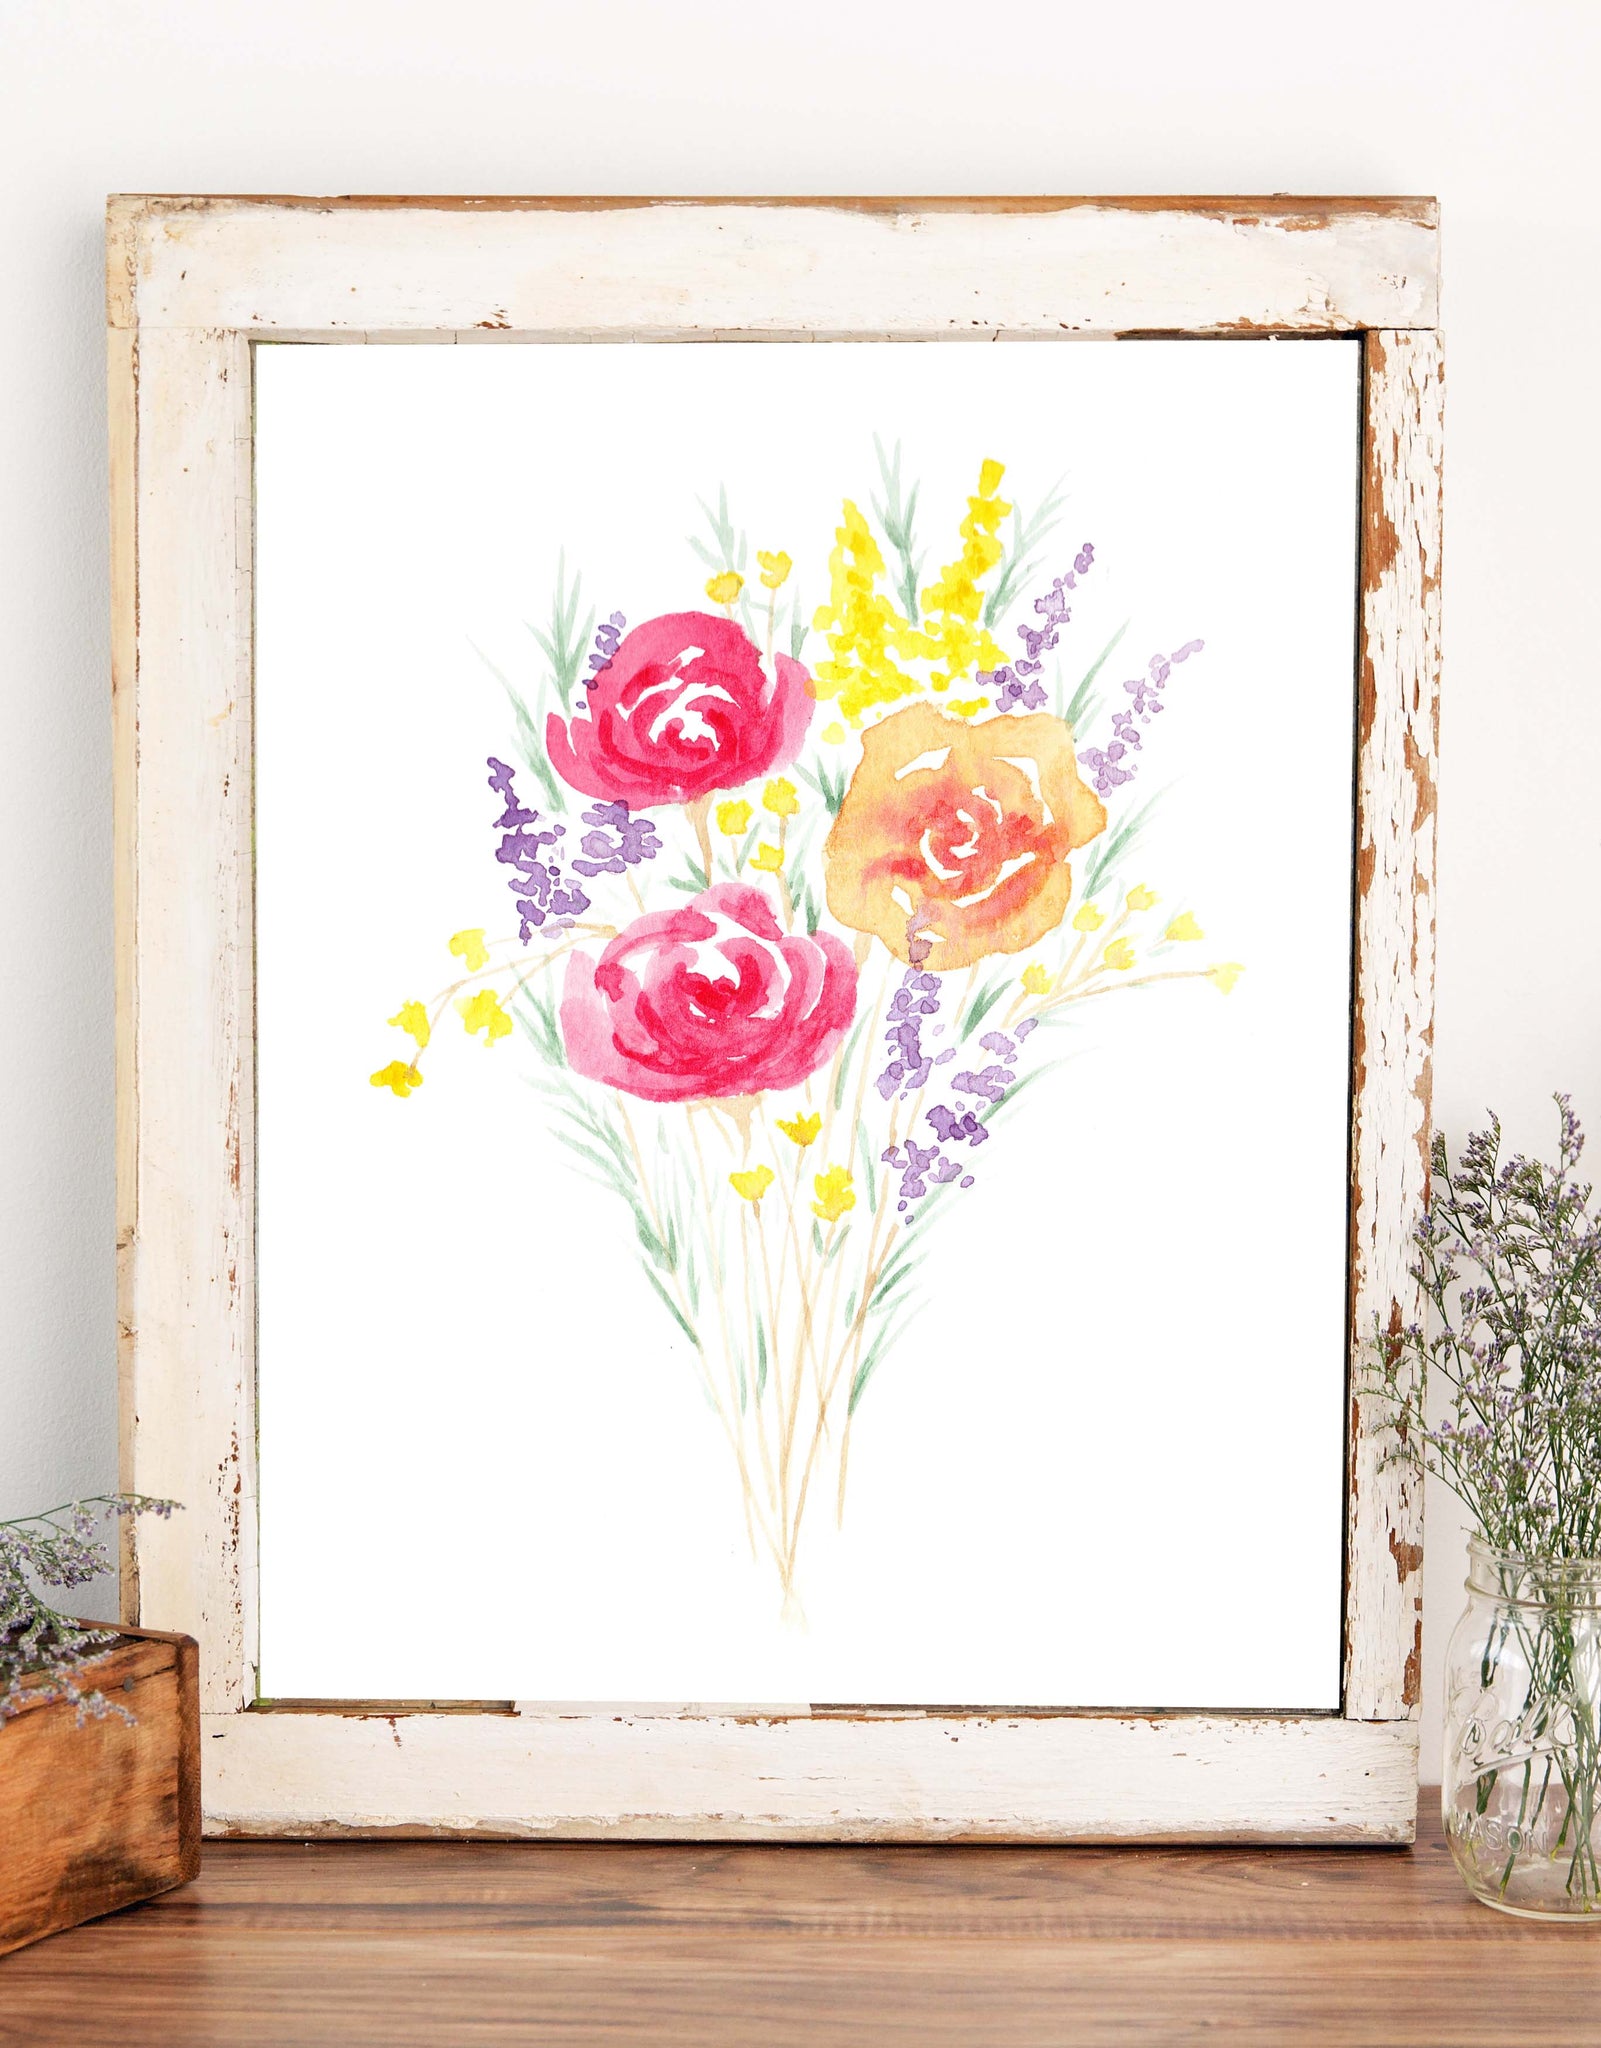 Watercolor wall art of a Bouquet of warm red, orange, yellow and purple wild flowers gathered together shown in a chippy old farmhouse frame